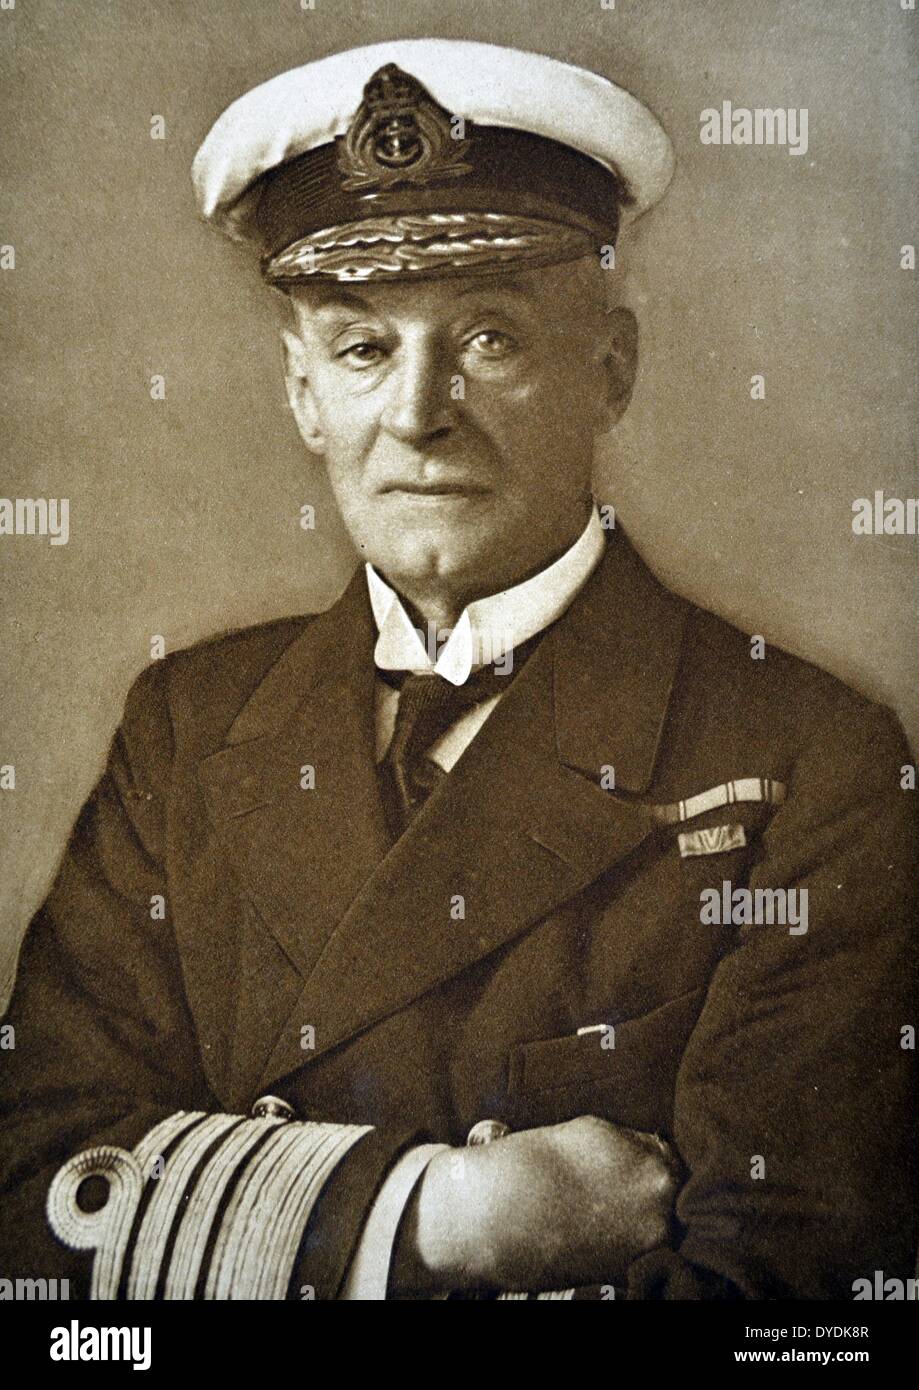 Admiral Sir Henry Bradwardine Jackson (1855-1929), a Yorkshire man, who reached the twin pinnacles of a naval officer of the Royal Navy officers career serving as First Sea Lord from 1915-1916 during World War One and promoted to the rank of Admiral of the Fleet in 1919. 1915. Stock Photo